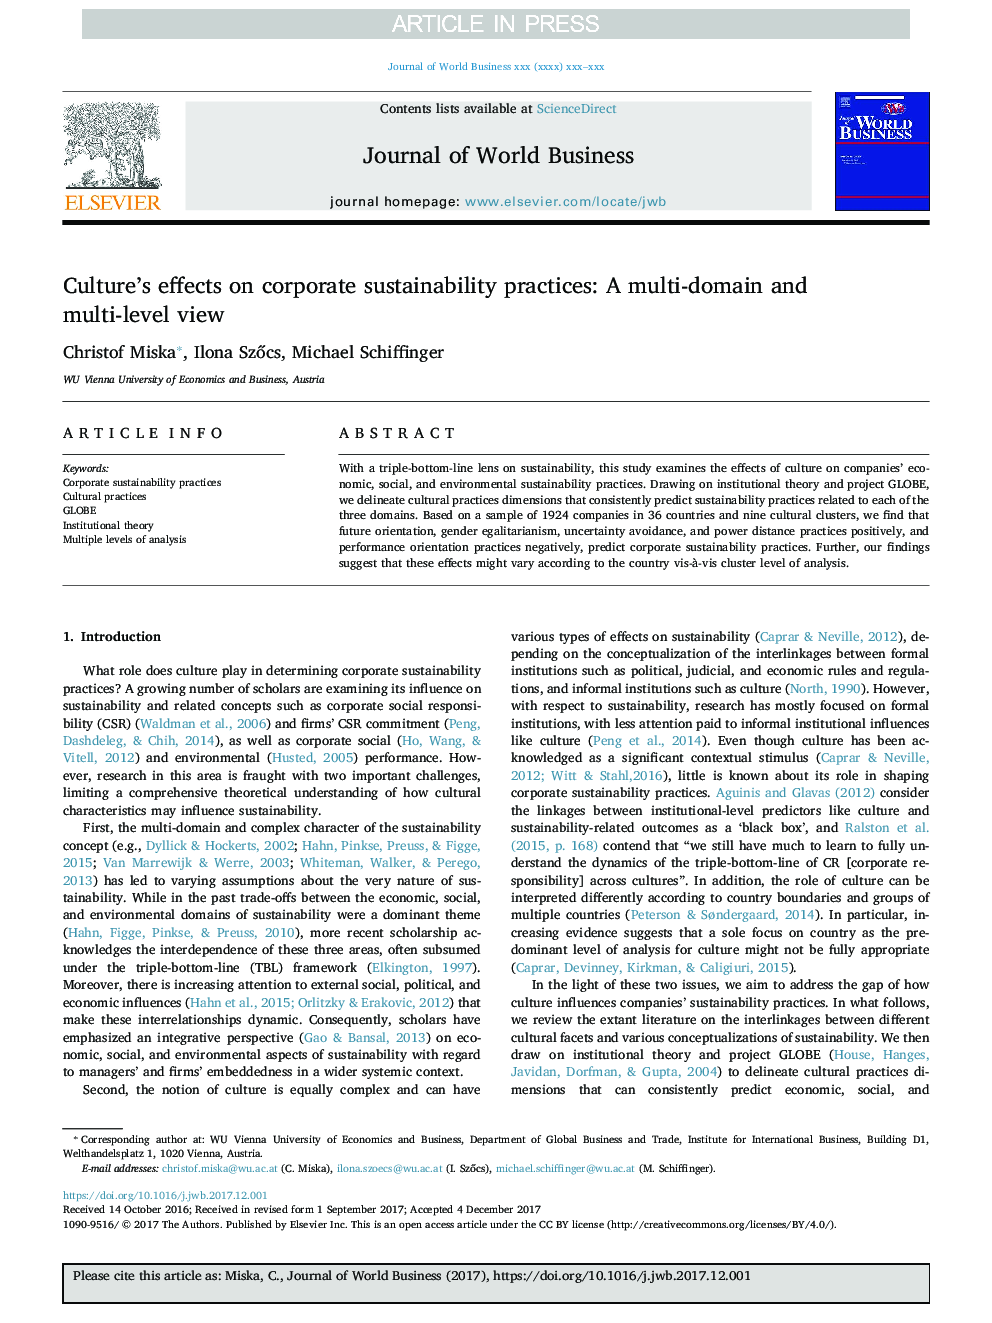 Culture's effects on corporate sustainability practices: A multi-domain and multi-level view